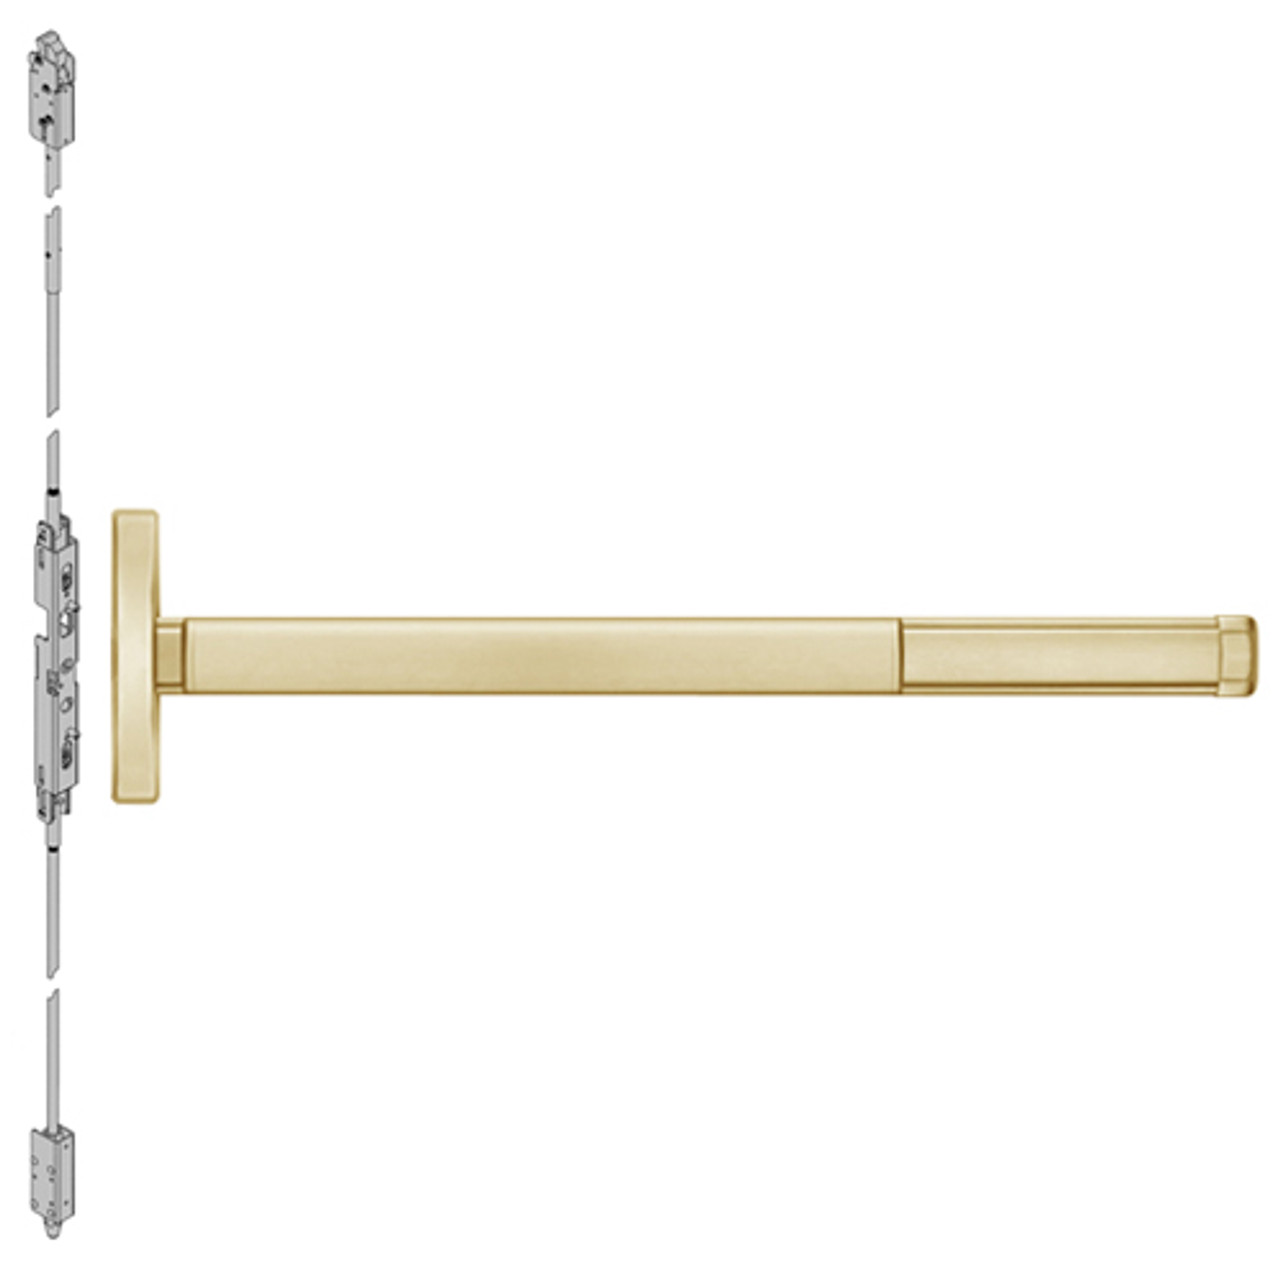 2602LBR-606-48 PHI 2600 Series Non Fire Rated Concealed Vertical Rod Exit Device Prepped for Dummy Trim with Less Bottom Rod in Satin Brass Finish